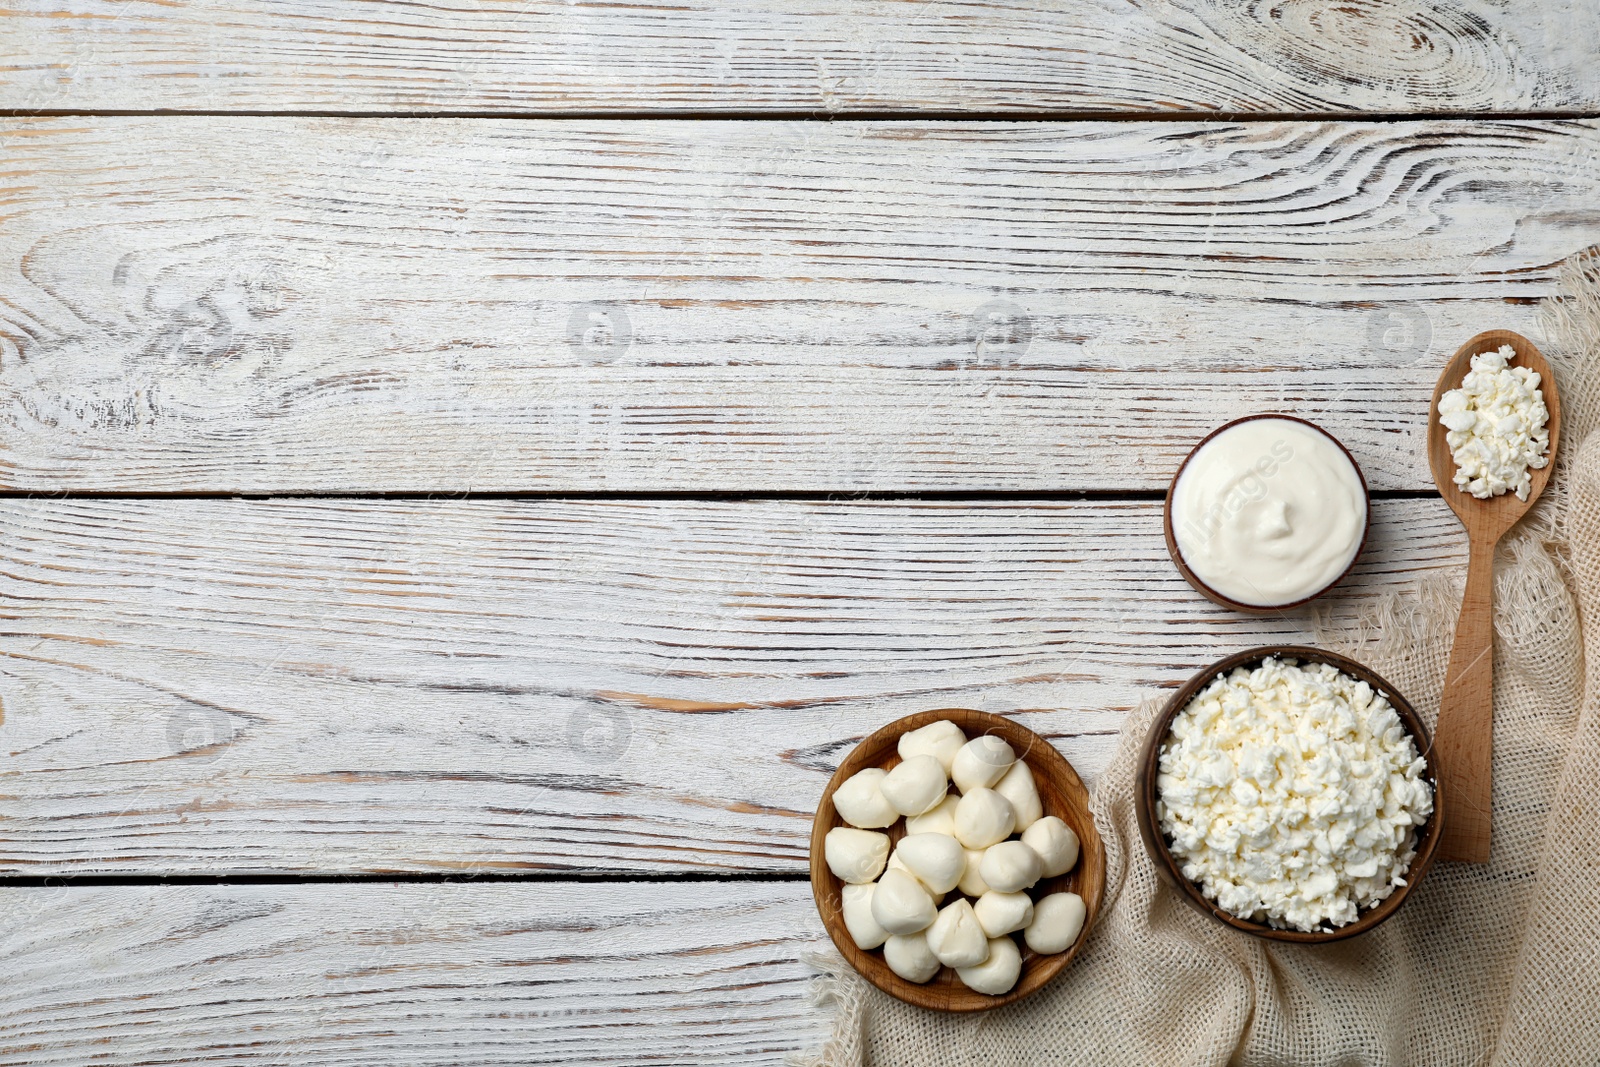 Photo of Different dairy products on wooden background